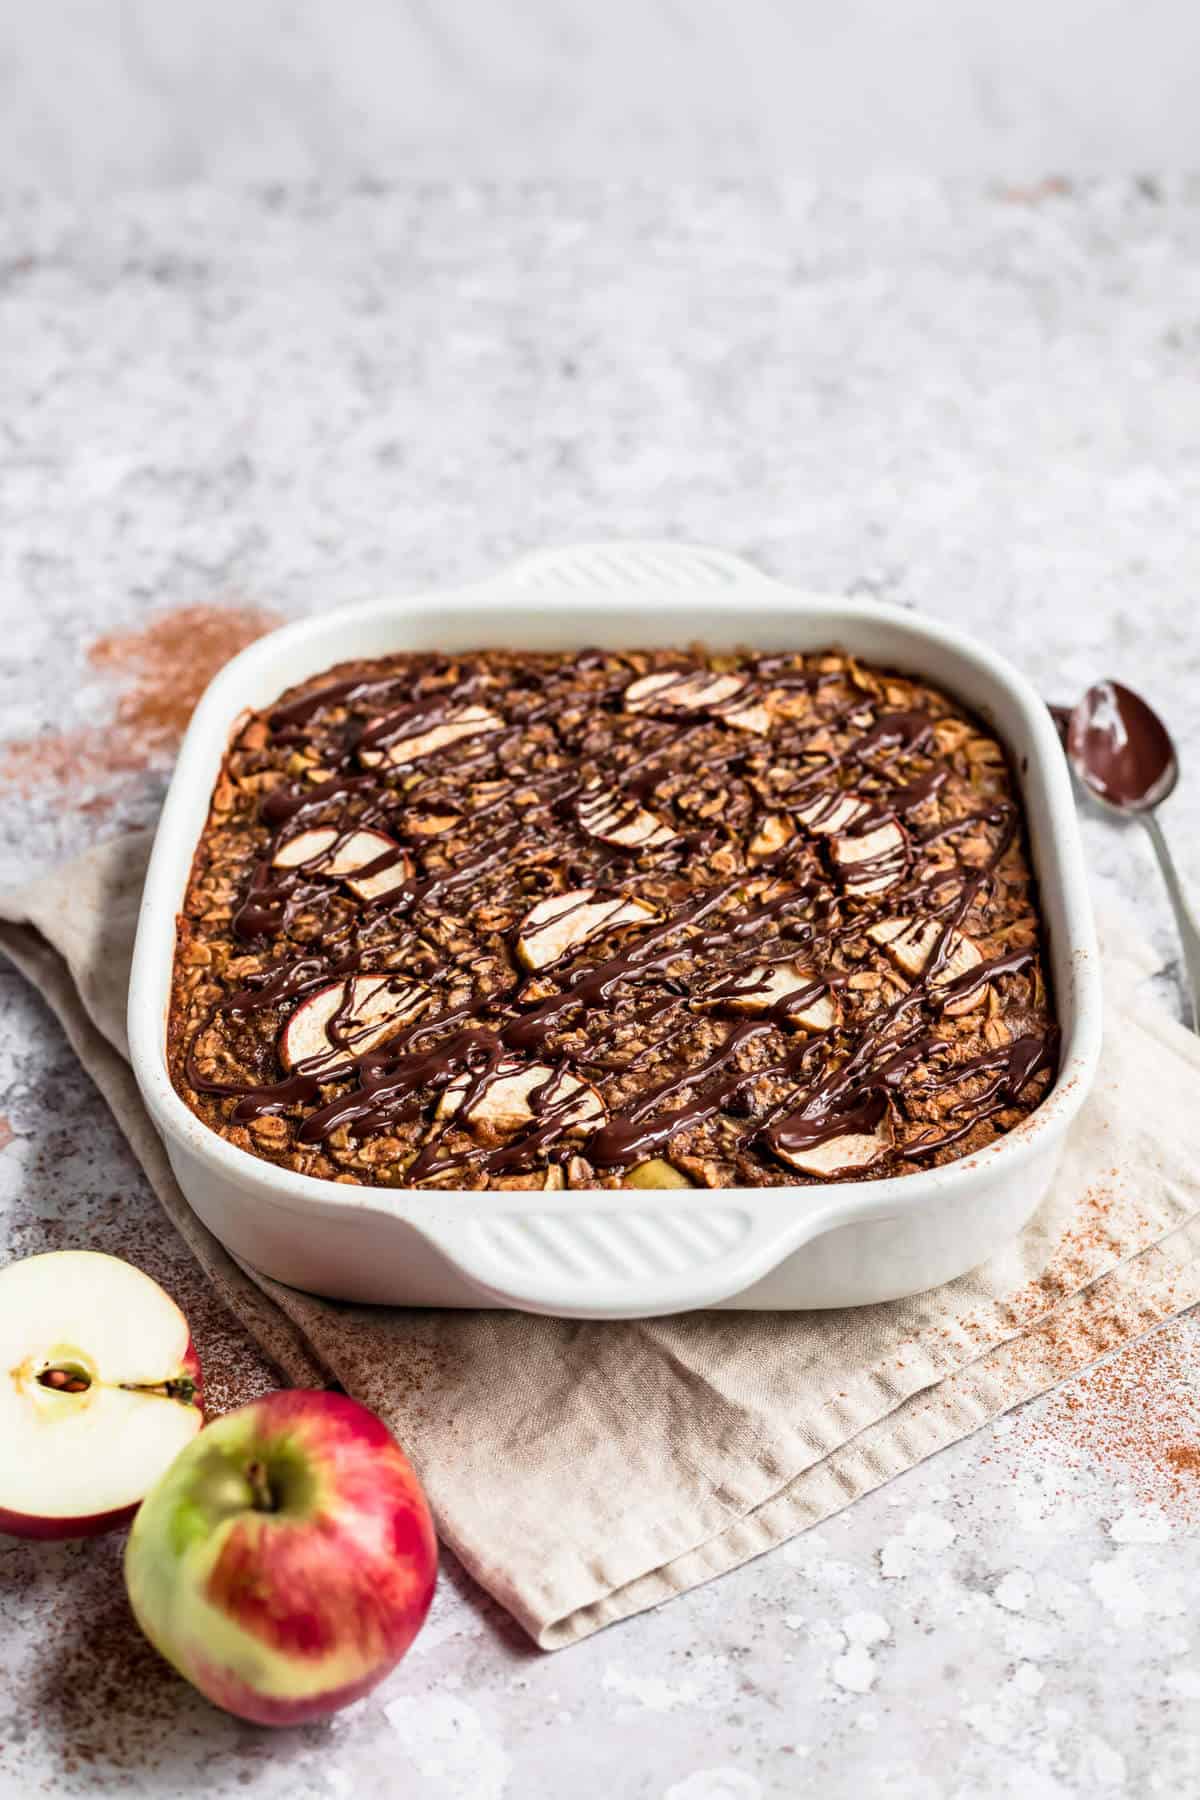 apple baked oatmeal in a ceramic dish on a napkin, drizzled with dark chocolate